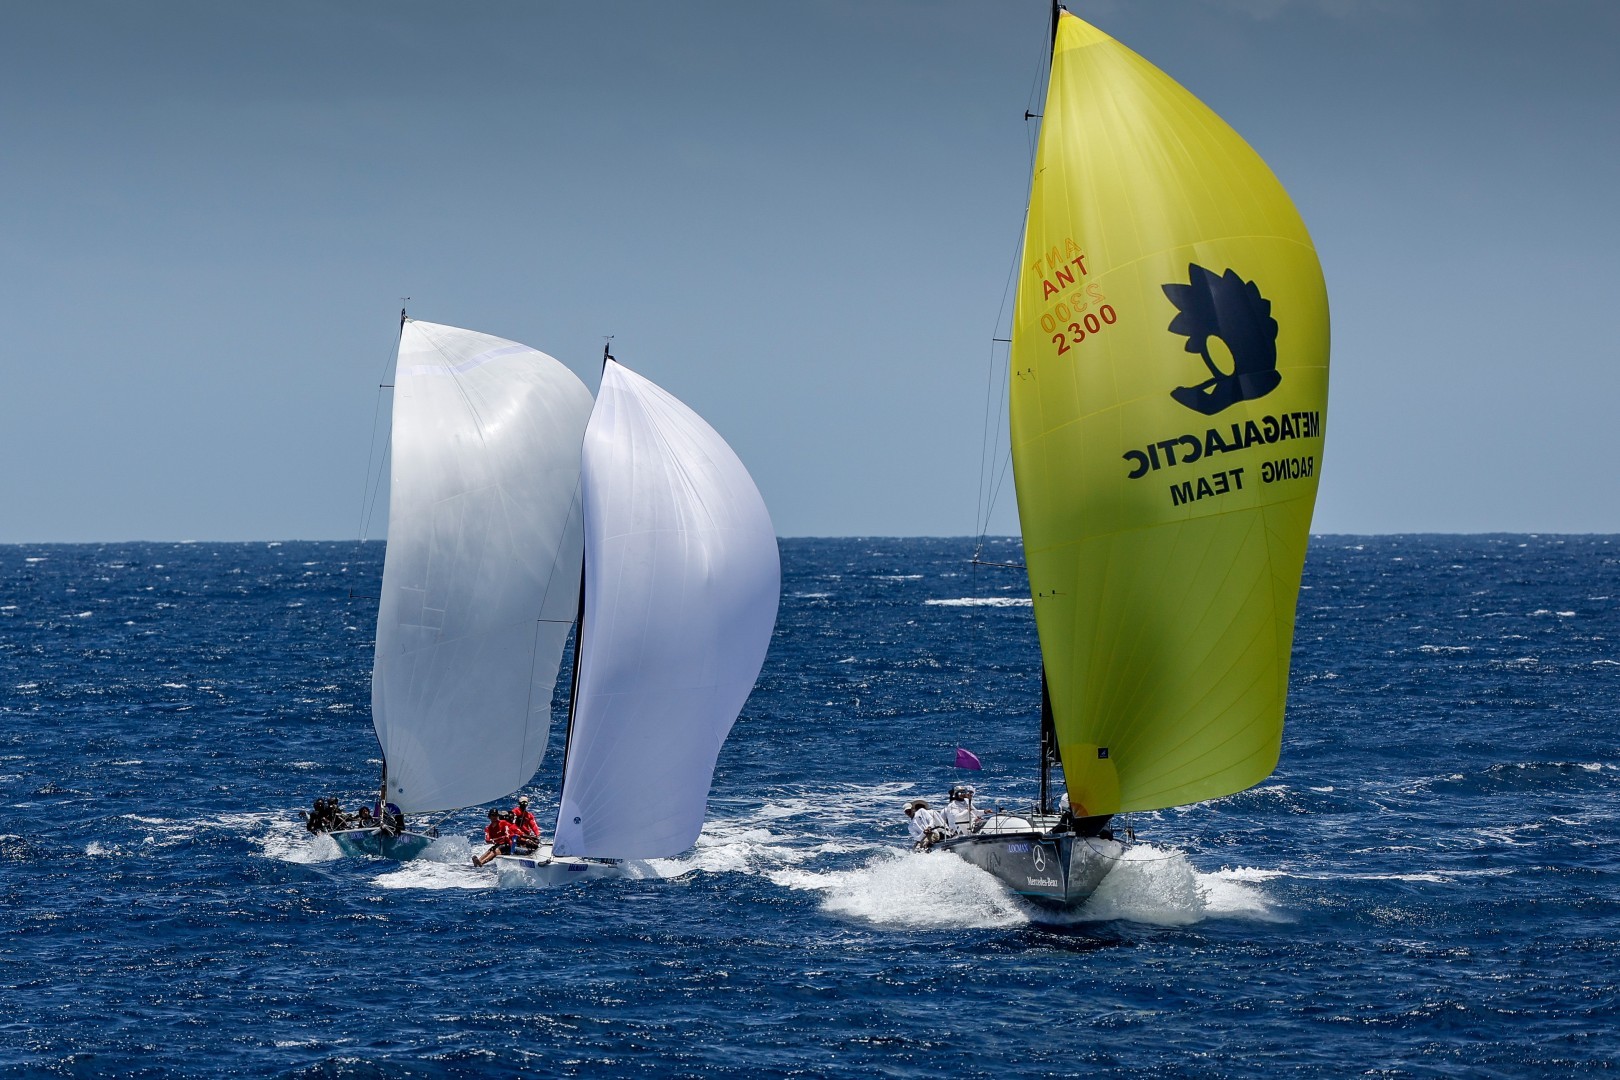 Spirit, Whiplash and Scia on a downwind leg of the 2022 Axxess Marine Y2K Race Day. ©pwpictures.com